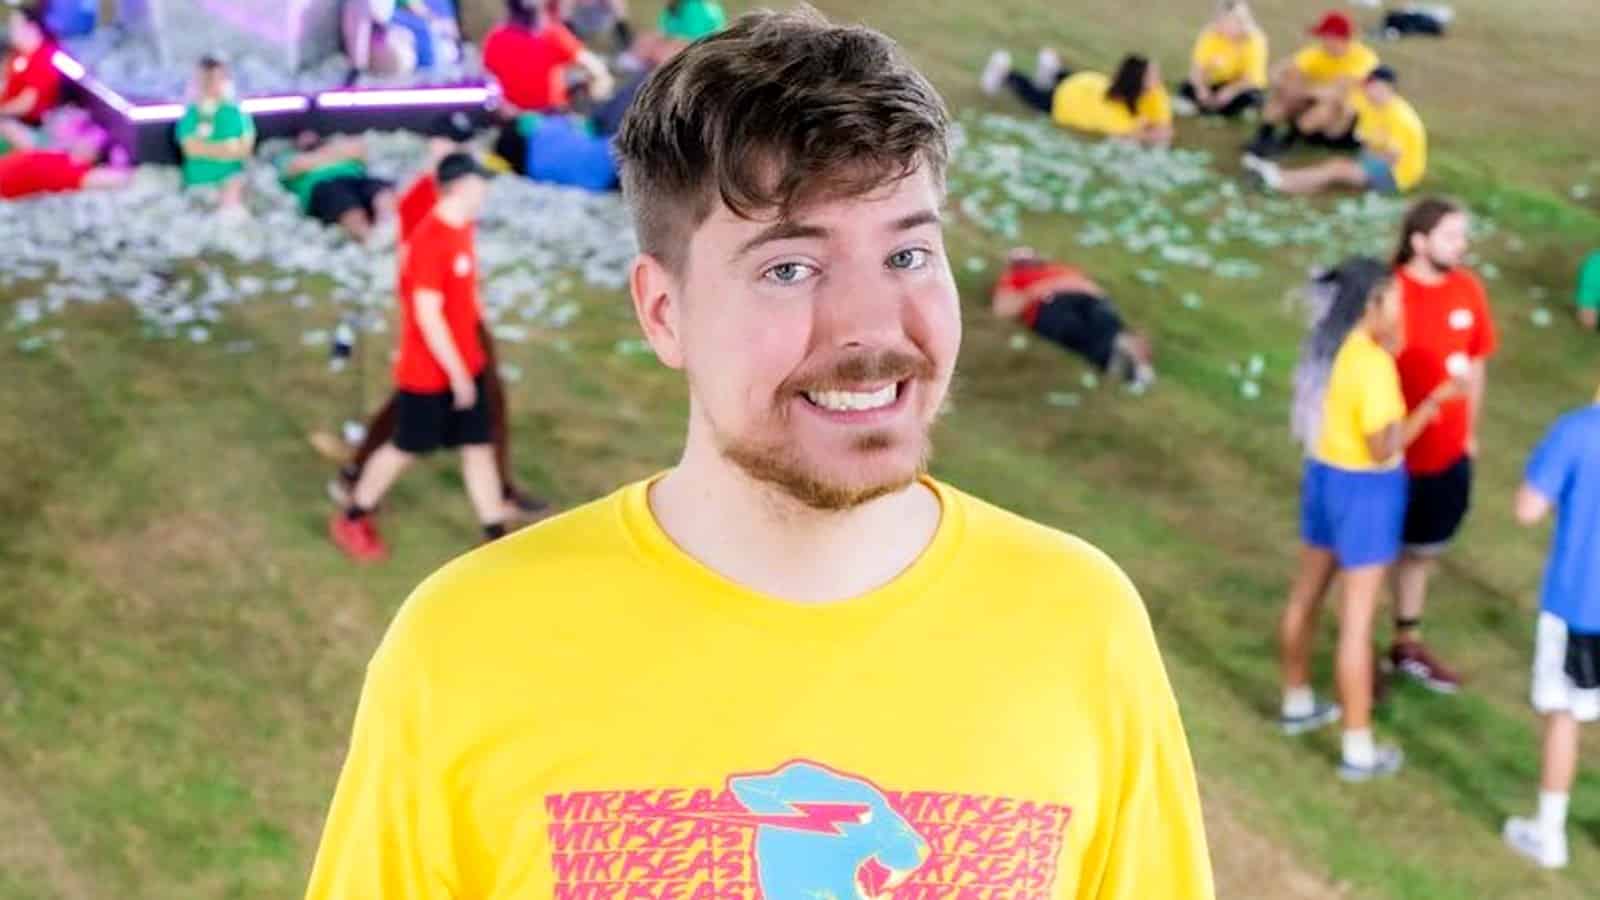 MrBeast stands in front of the camera